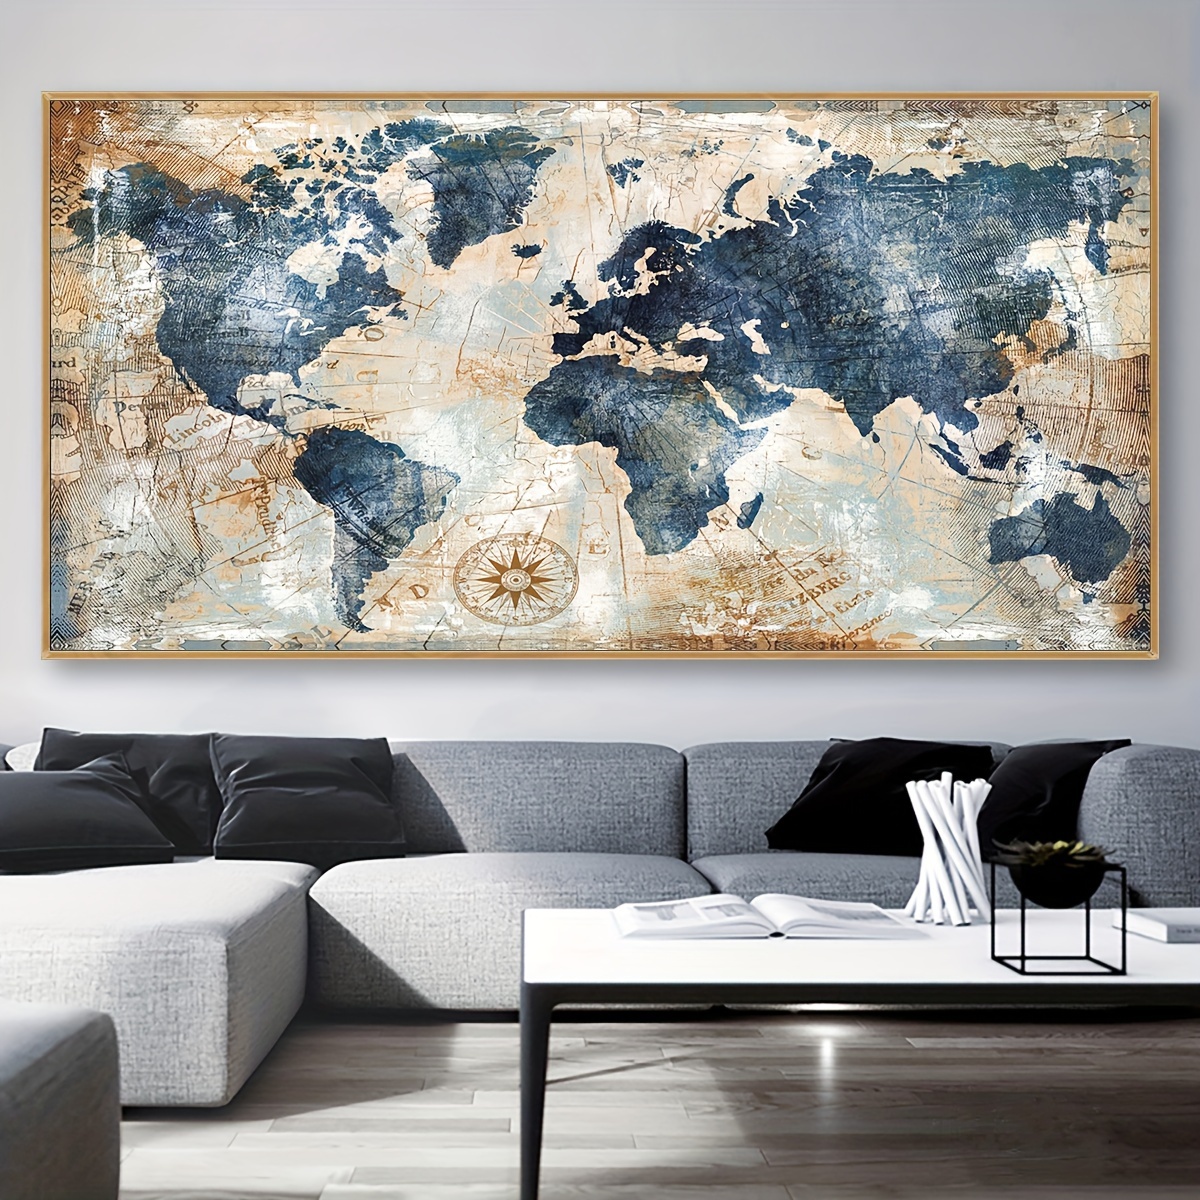 

1pc Unframed Canvas Poster, Vintage Art, World Map Poster, Ideal Gift For Bedroom Living Room Corridor, Wall Art, Wall Decor, Winter Decor, Room Decoration